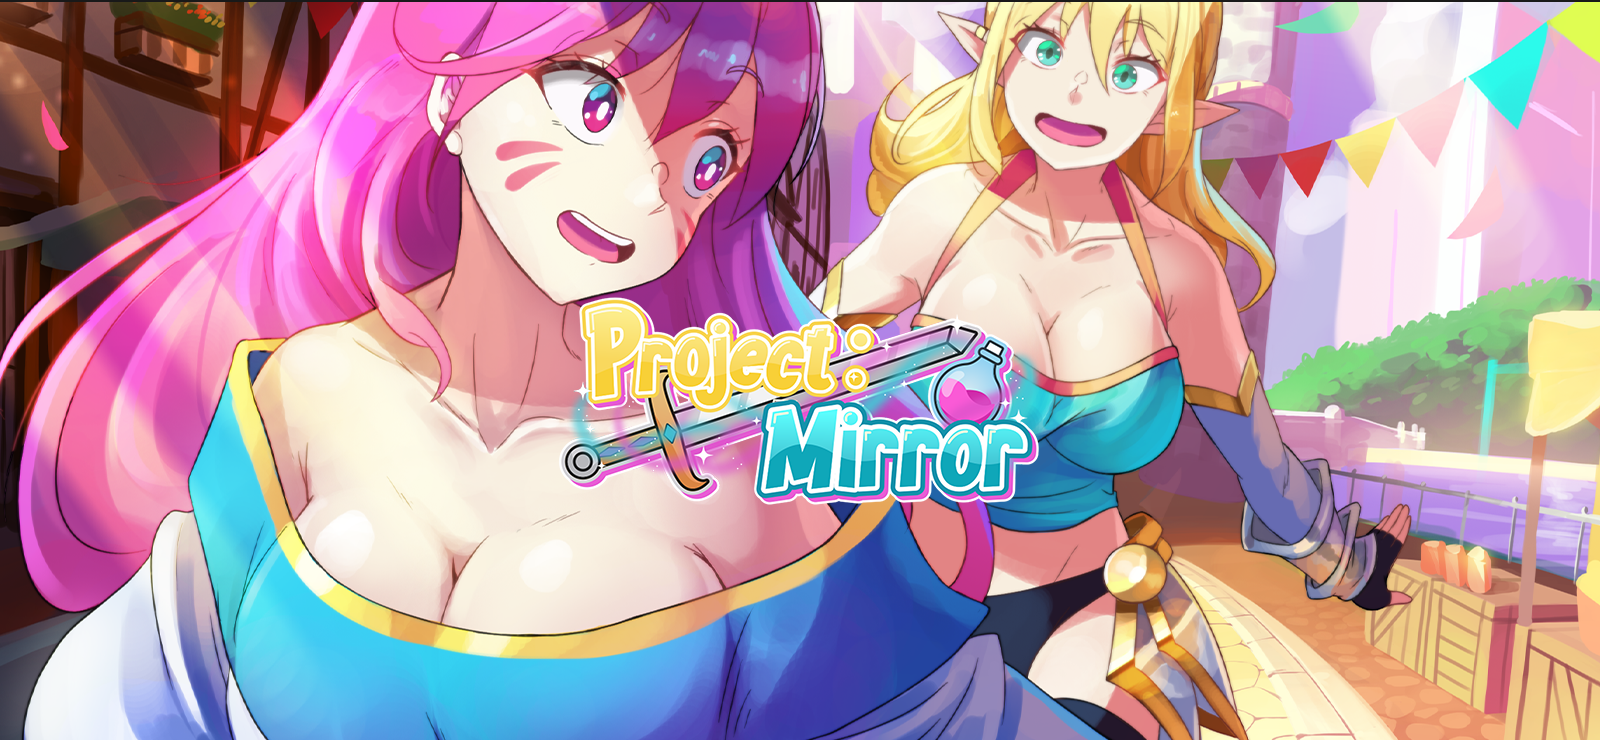 Project: Mirror